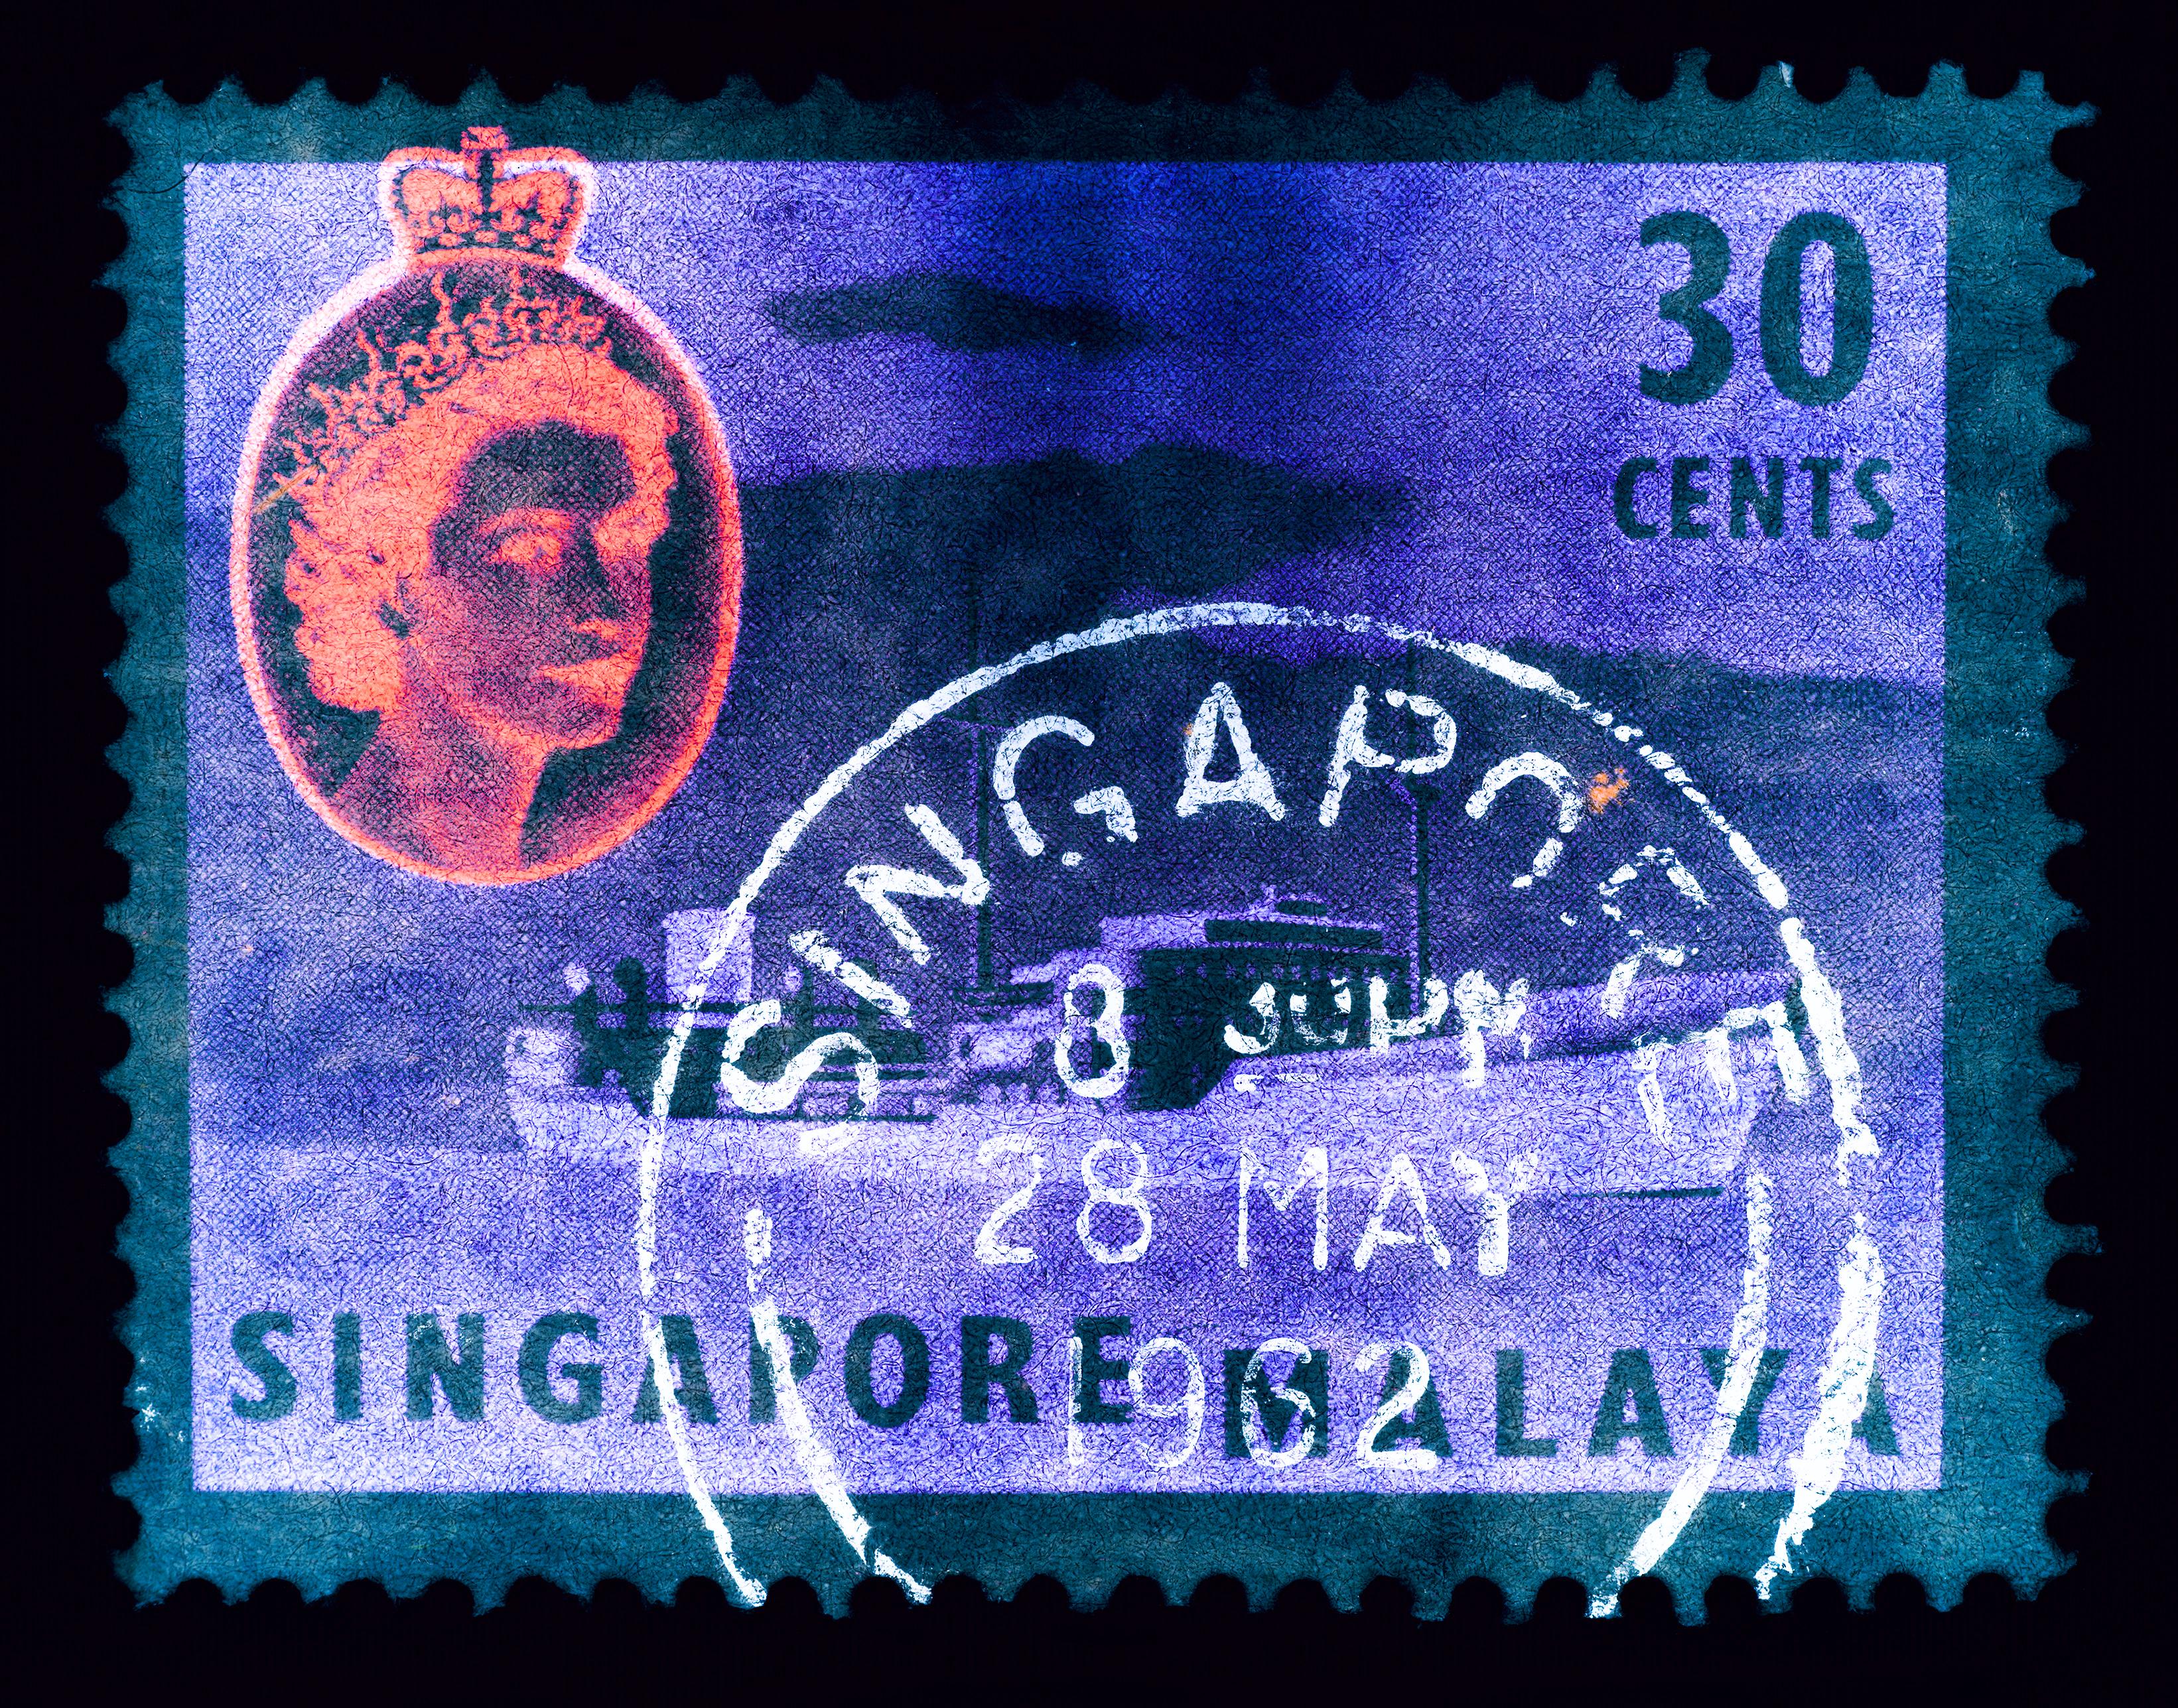 Heidler & Heeps Print - Singapore Stamp Collection, 30 Cents QEII Oil Tanker Teal - Pop Art Color Photo